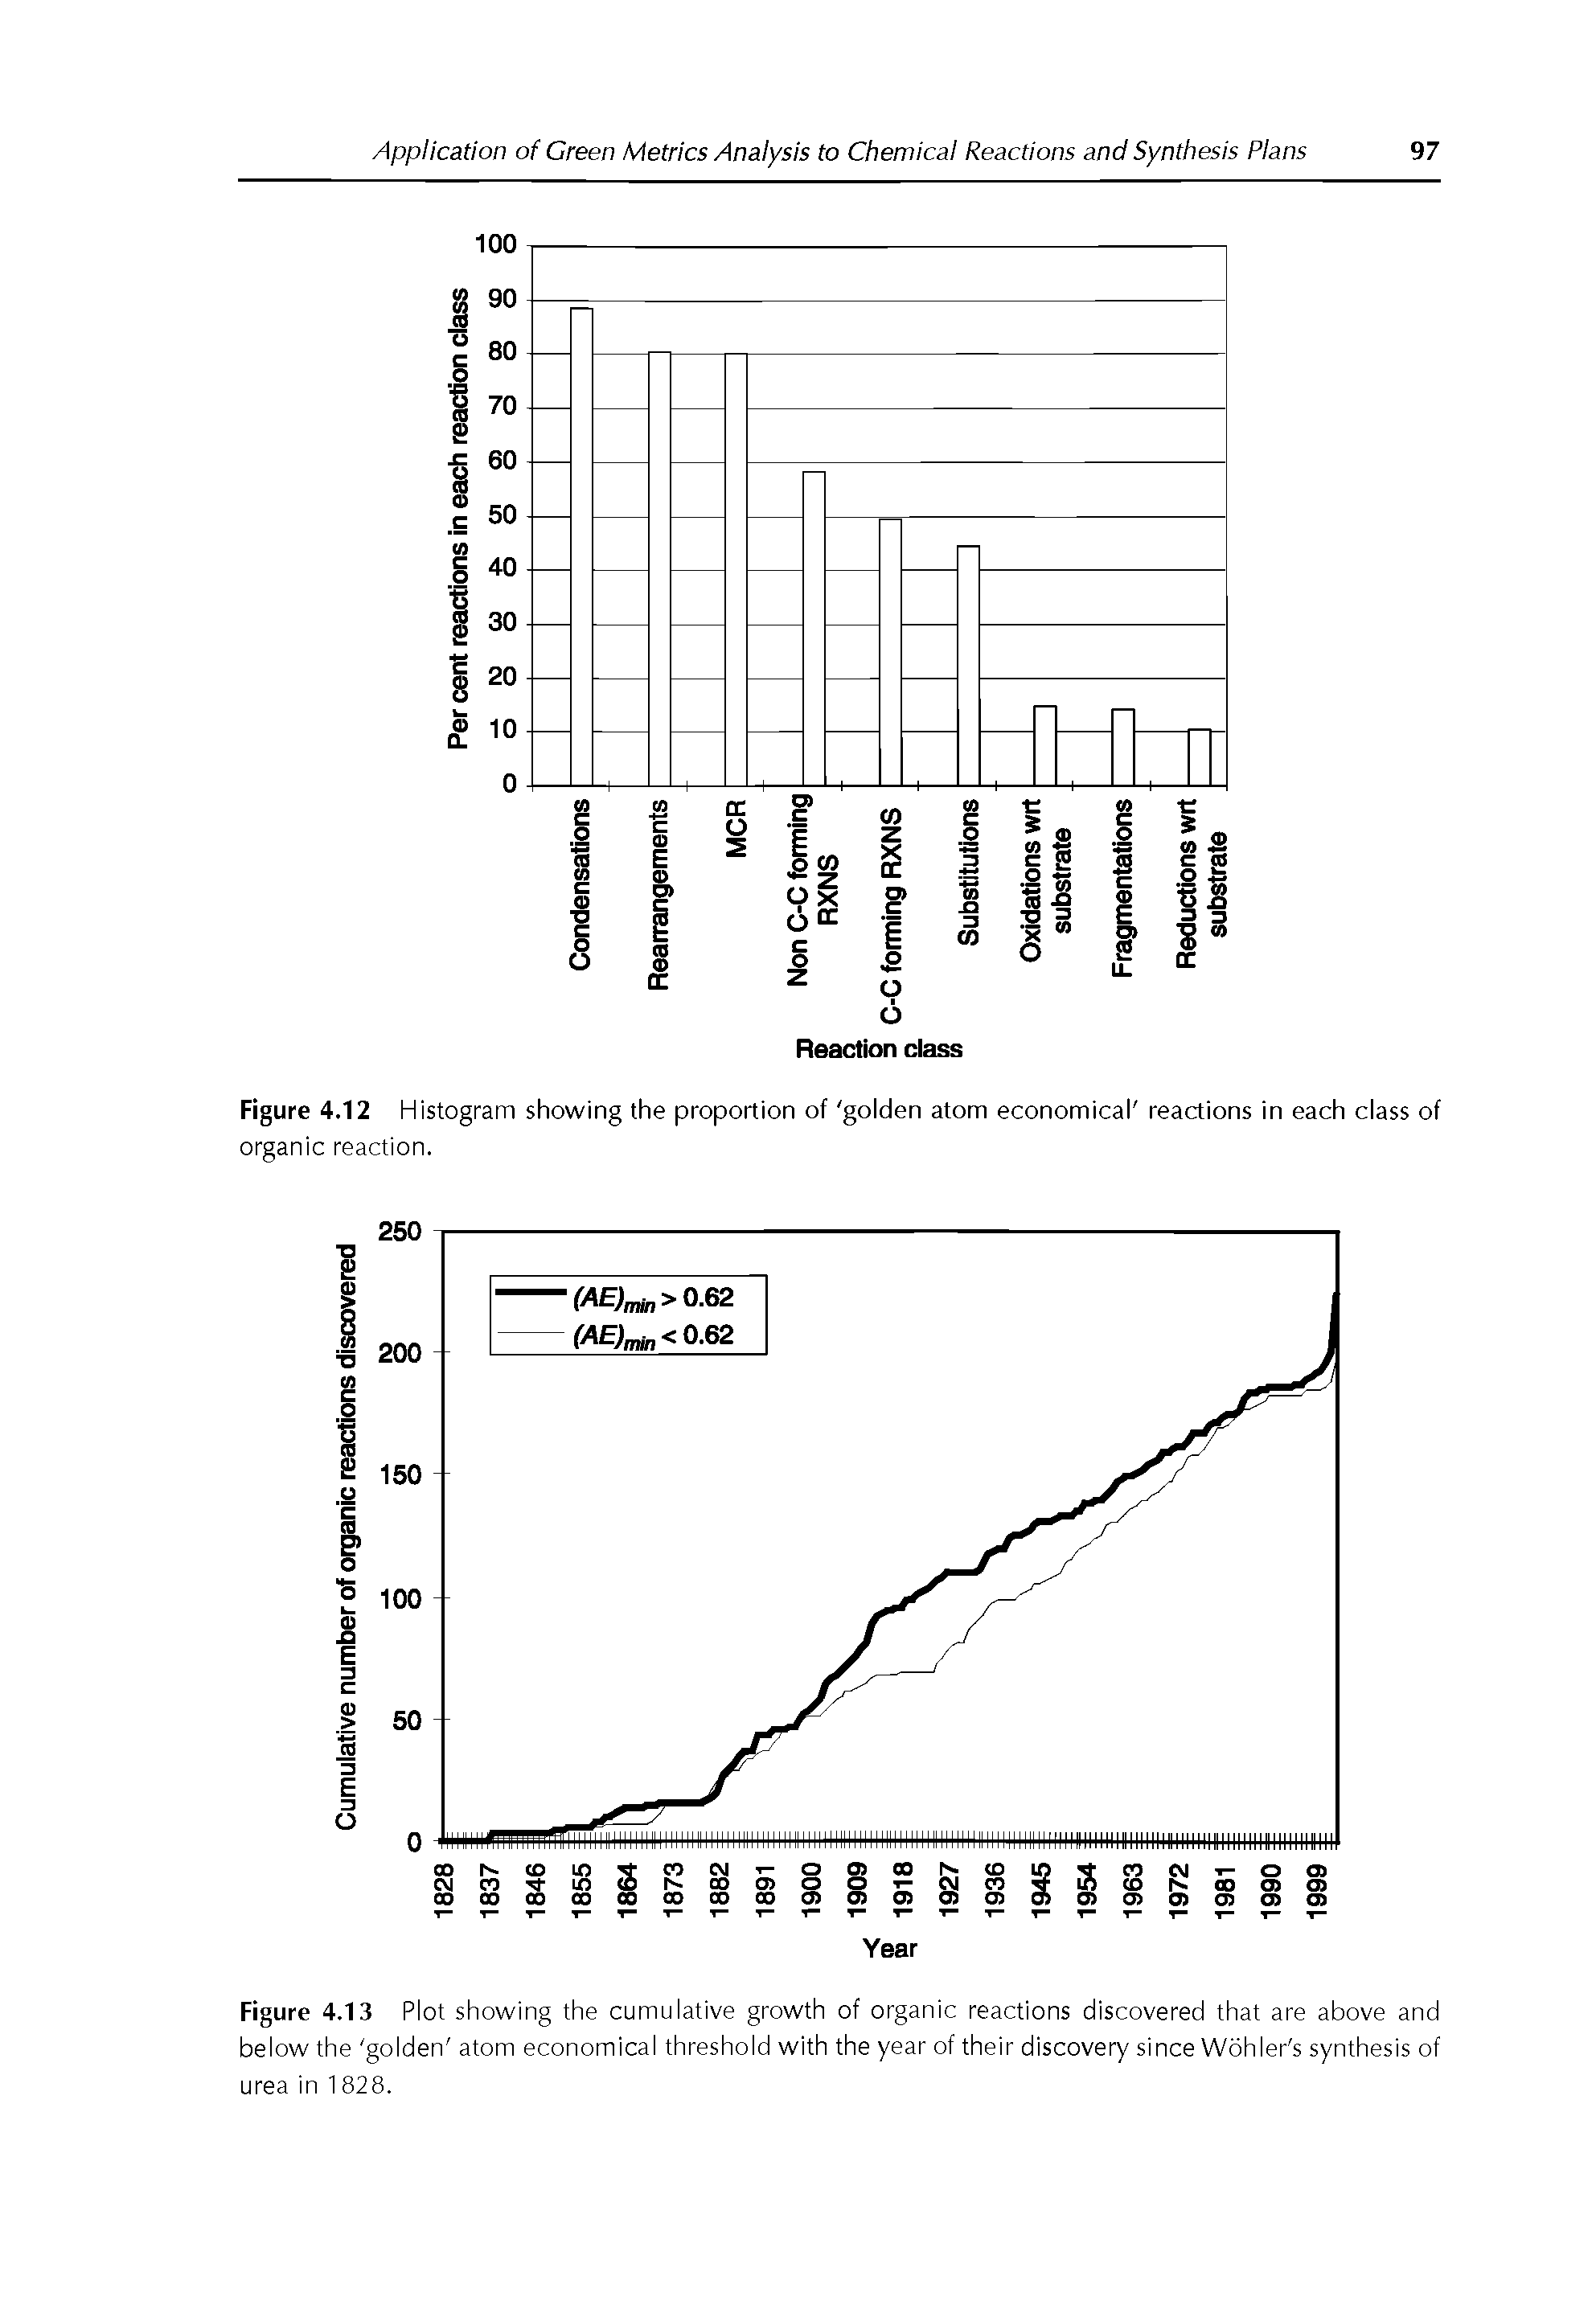 Figure 4.13 Piot showing the cumuiative growth of organic reactions discovered that are above and beiow the goiden atom economicai threshoid with the year of their discovery since Wbhier s synthesis of urea in 1 828.